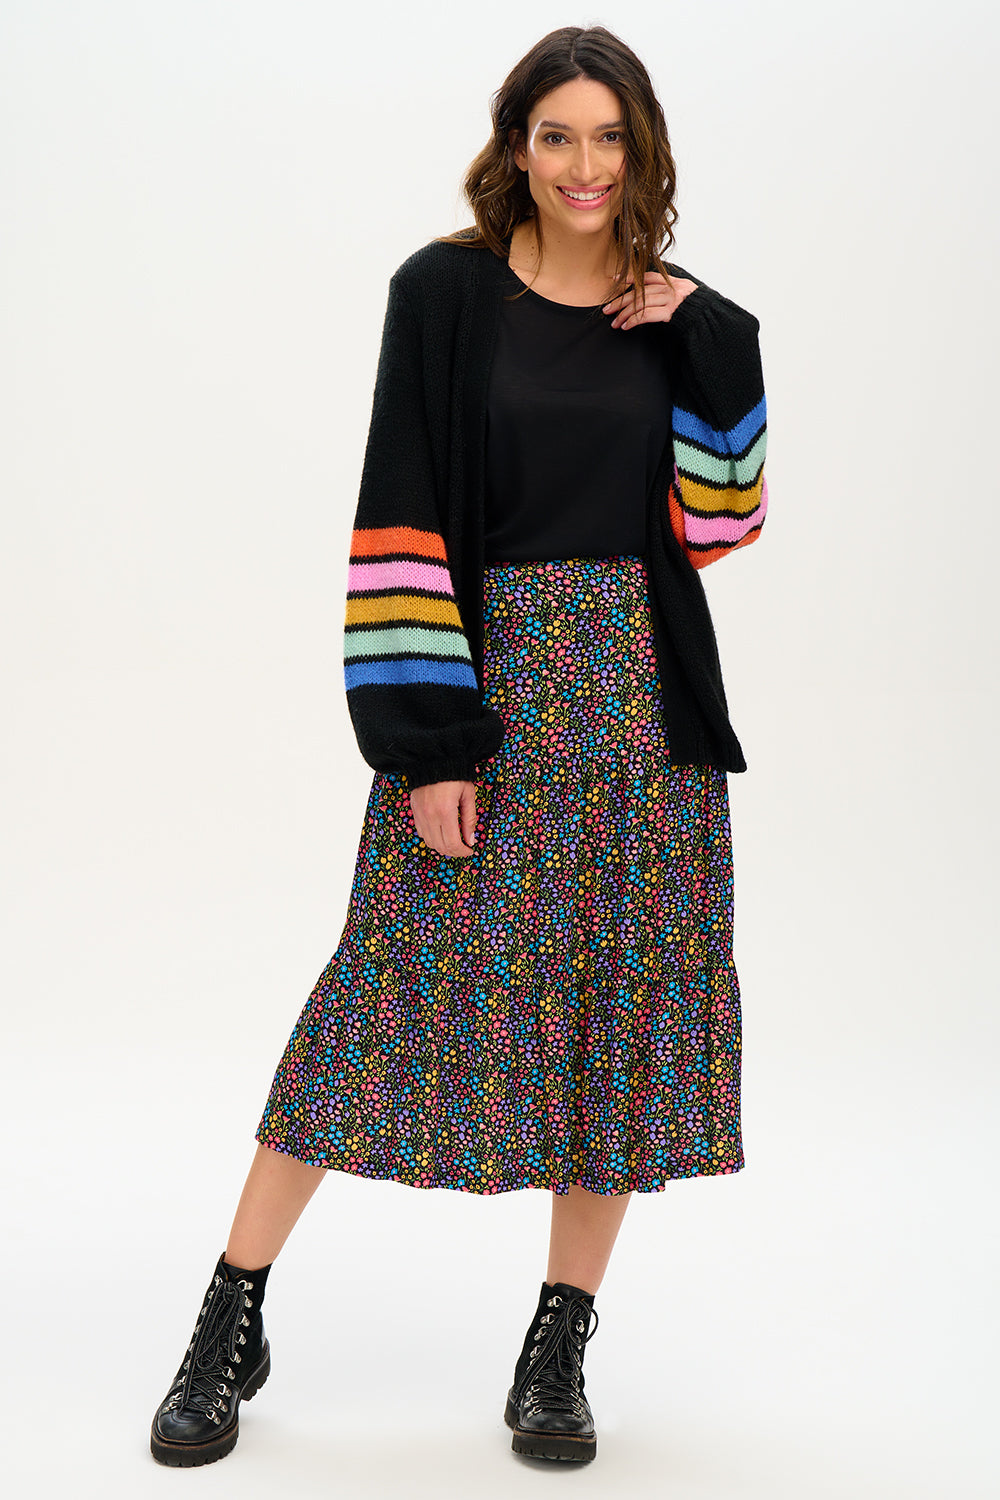 Felicity Tiered Skirt - Black/Multi, Ditsy Floral